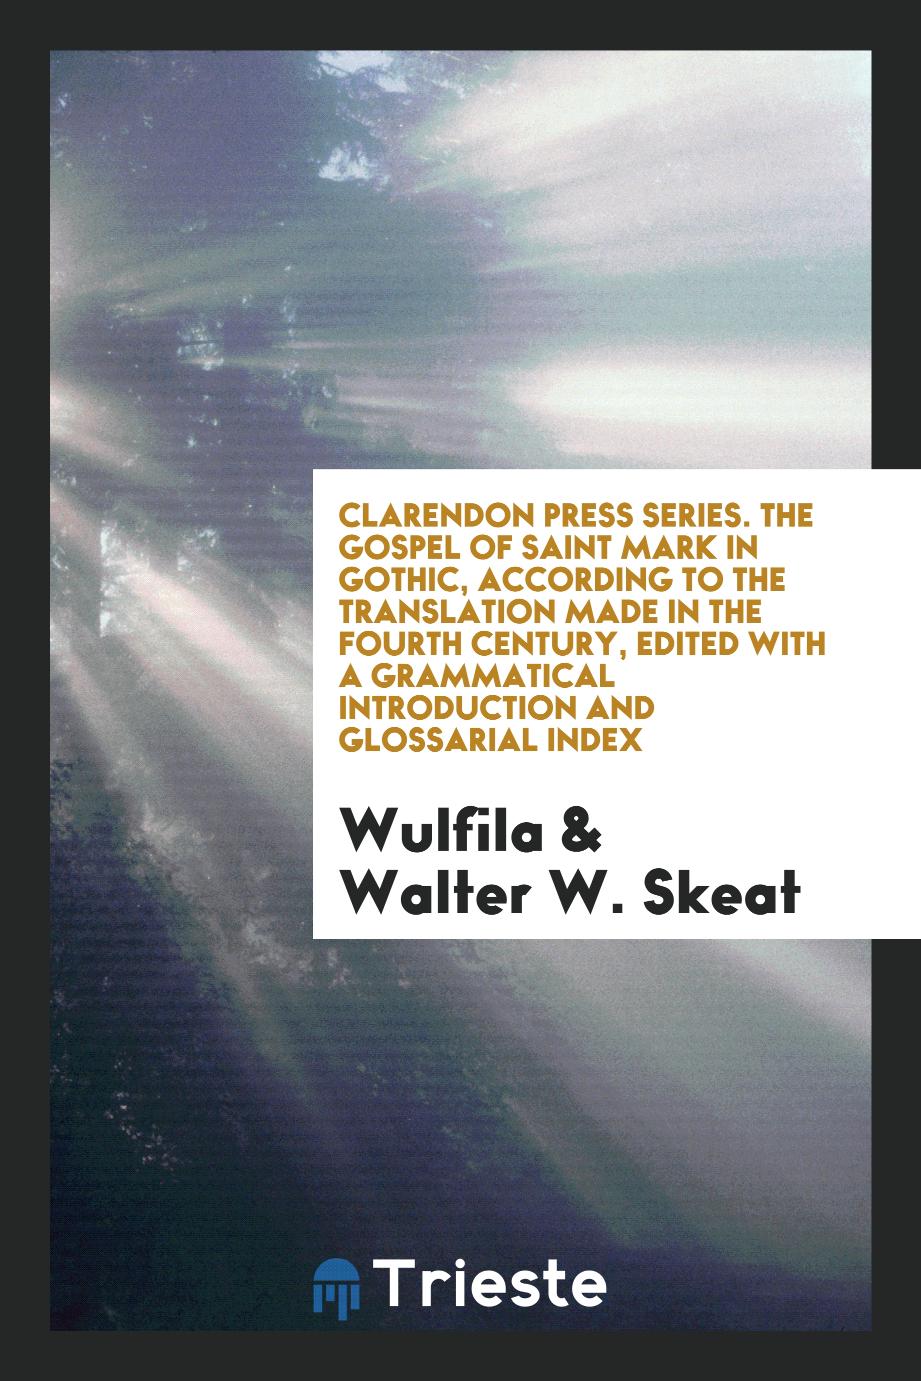 Clarendon Press Series. The Gospel of Saint Mark in Gothic, According to the Translation Made in the Fourth Century, Edited with a Grammatical Introduction and Glossarial Index